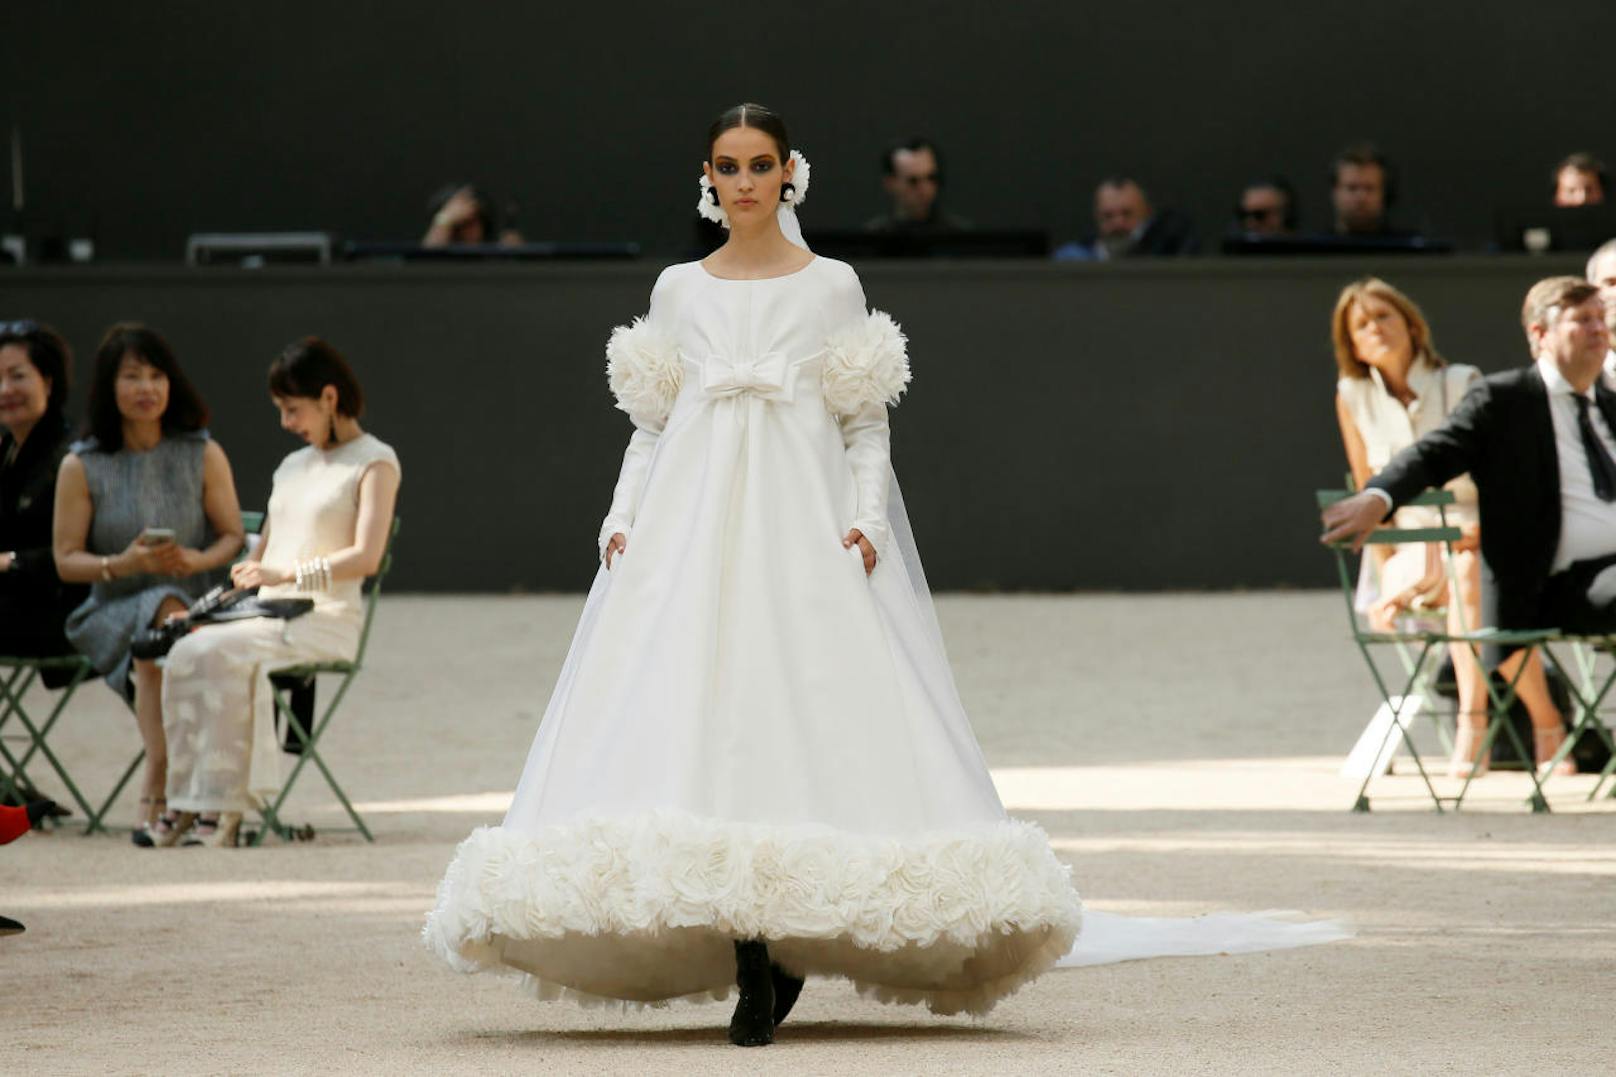 A model presents a creation by German designer Karl Lagerfeld as part of his Haute Couture Fall/Winter 2017/2018 collection for fashion house Chanel in Paris, France, July 4, 2017. REUTERS/Gonzalo Fuentes - RTX39YK6